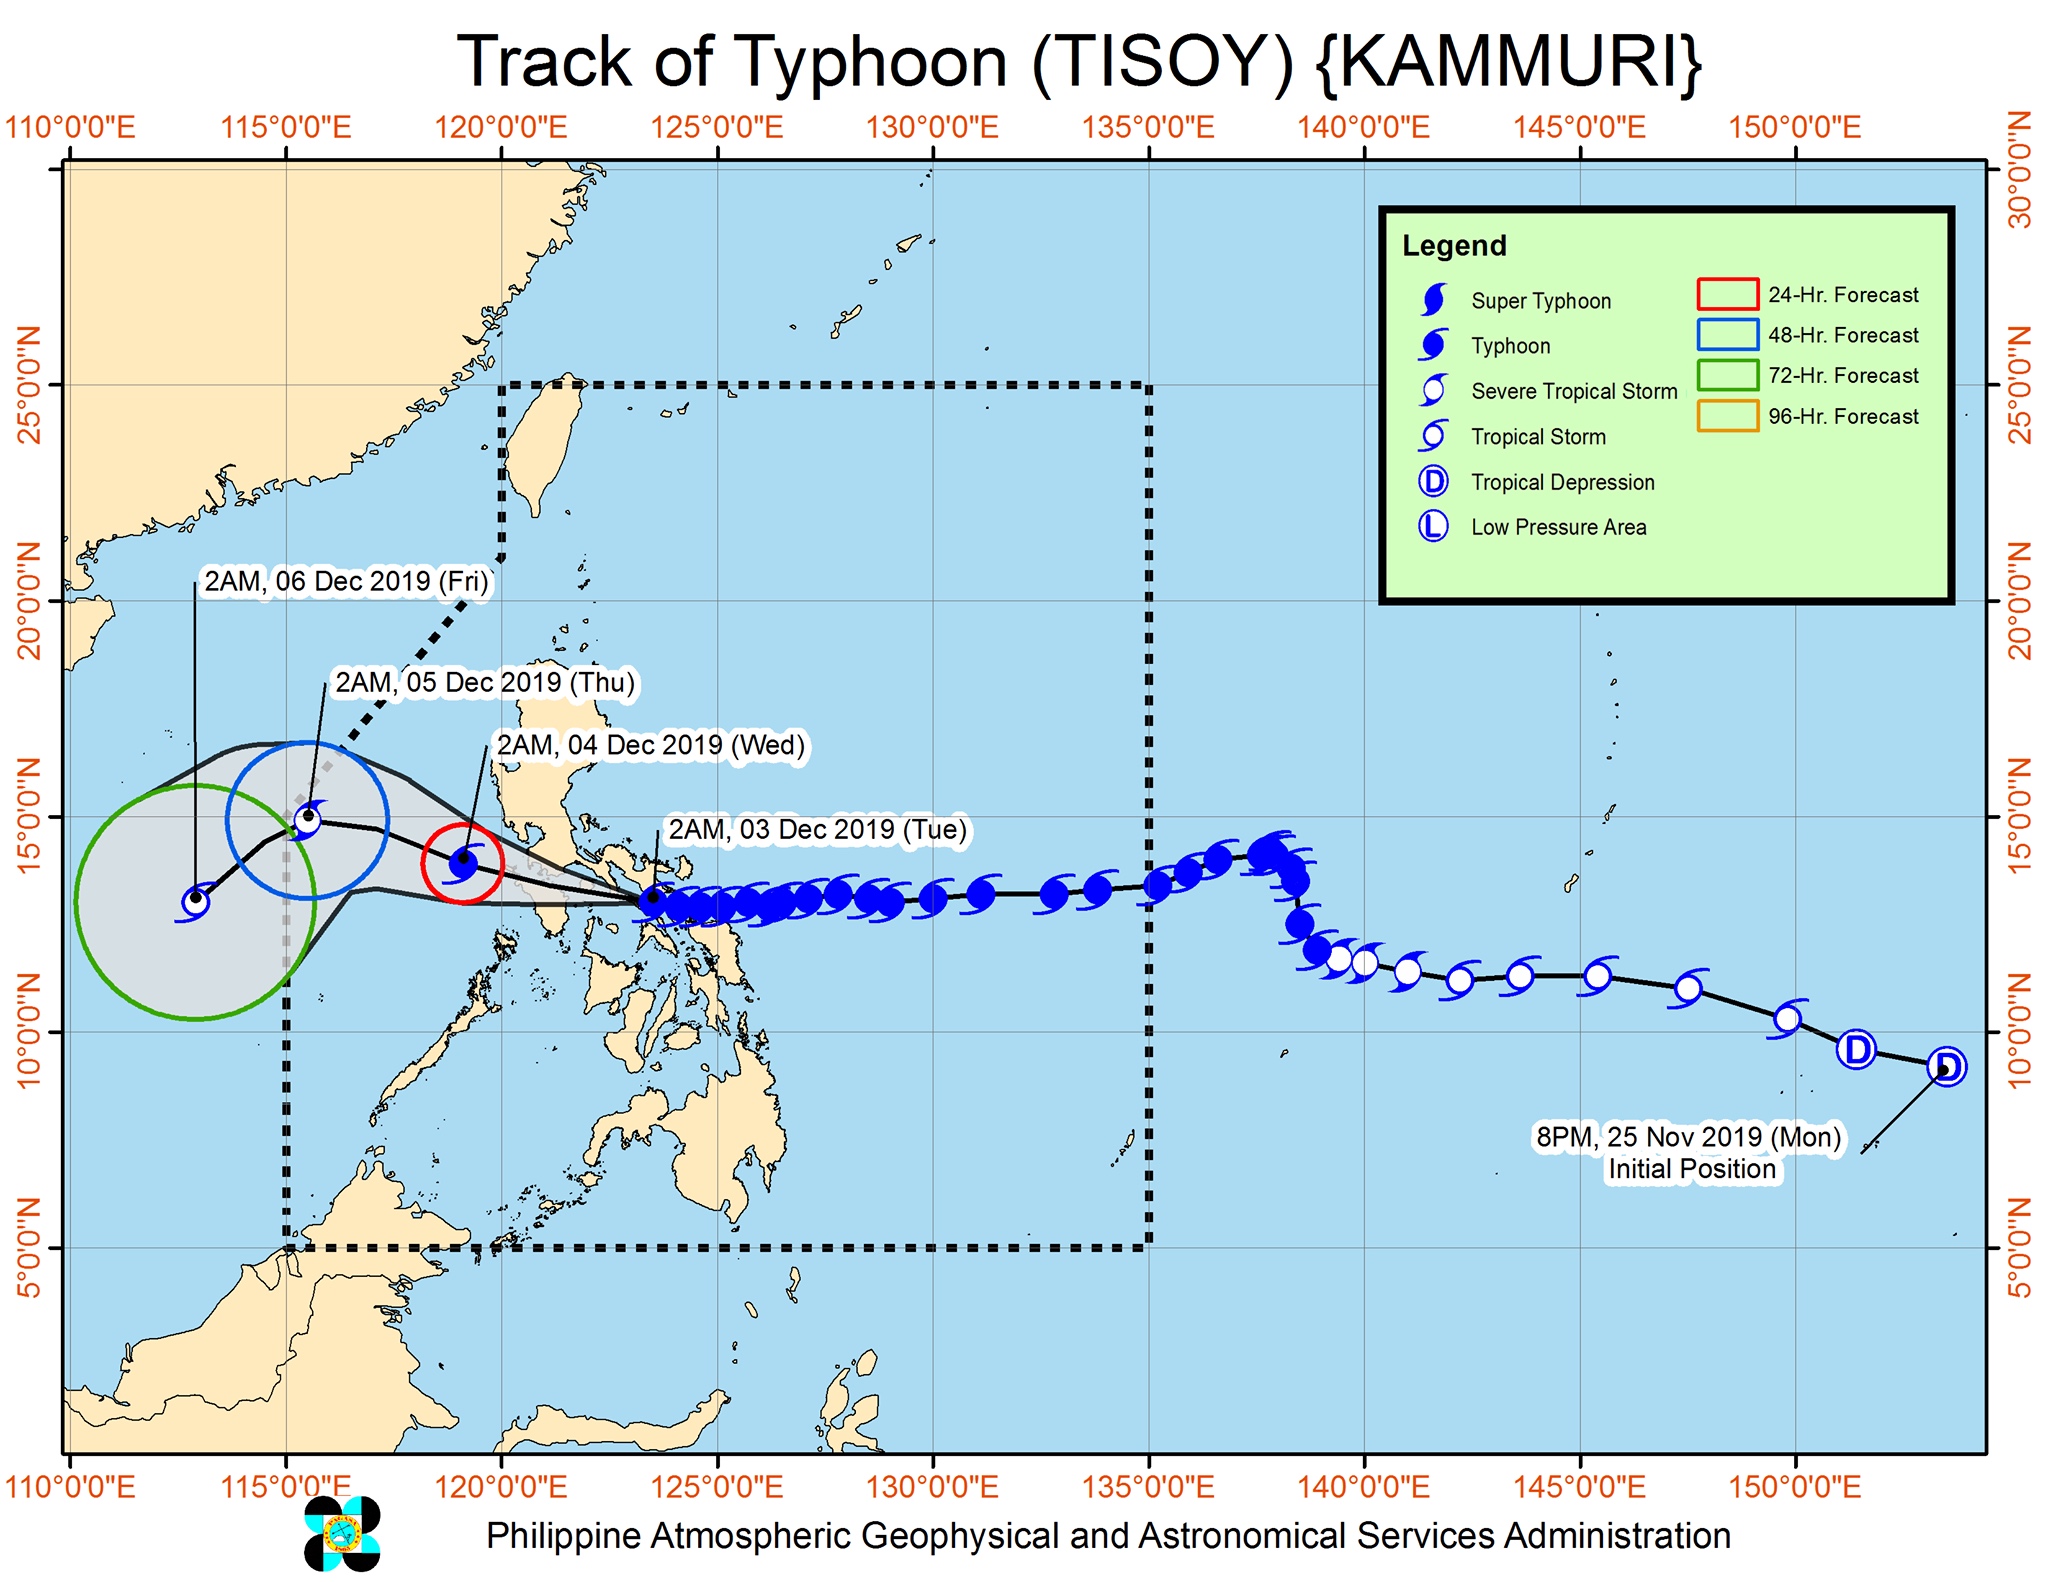 Forecast track of Typhoon Tisoy (Kammuri) as of December 3, 2019, 5 am. Image from PAGASA 